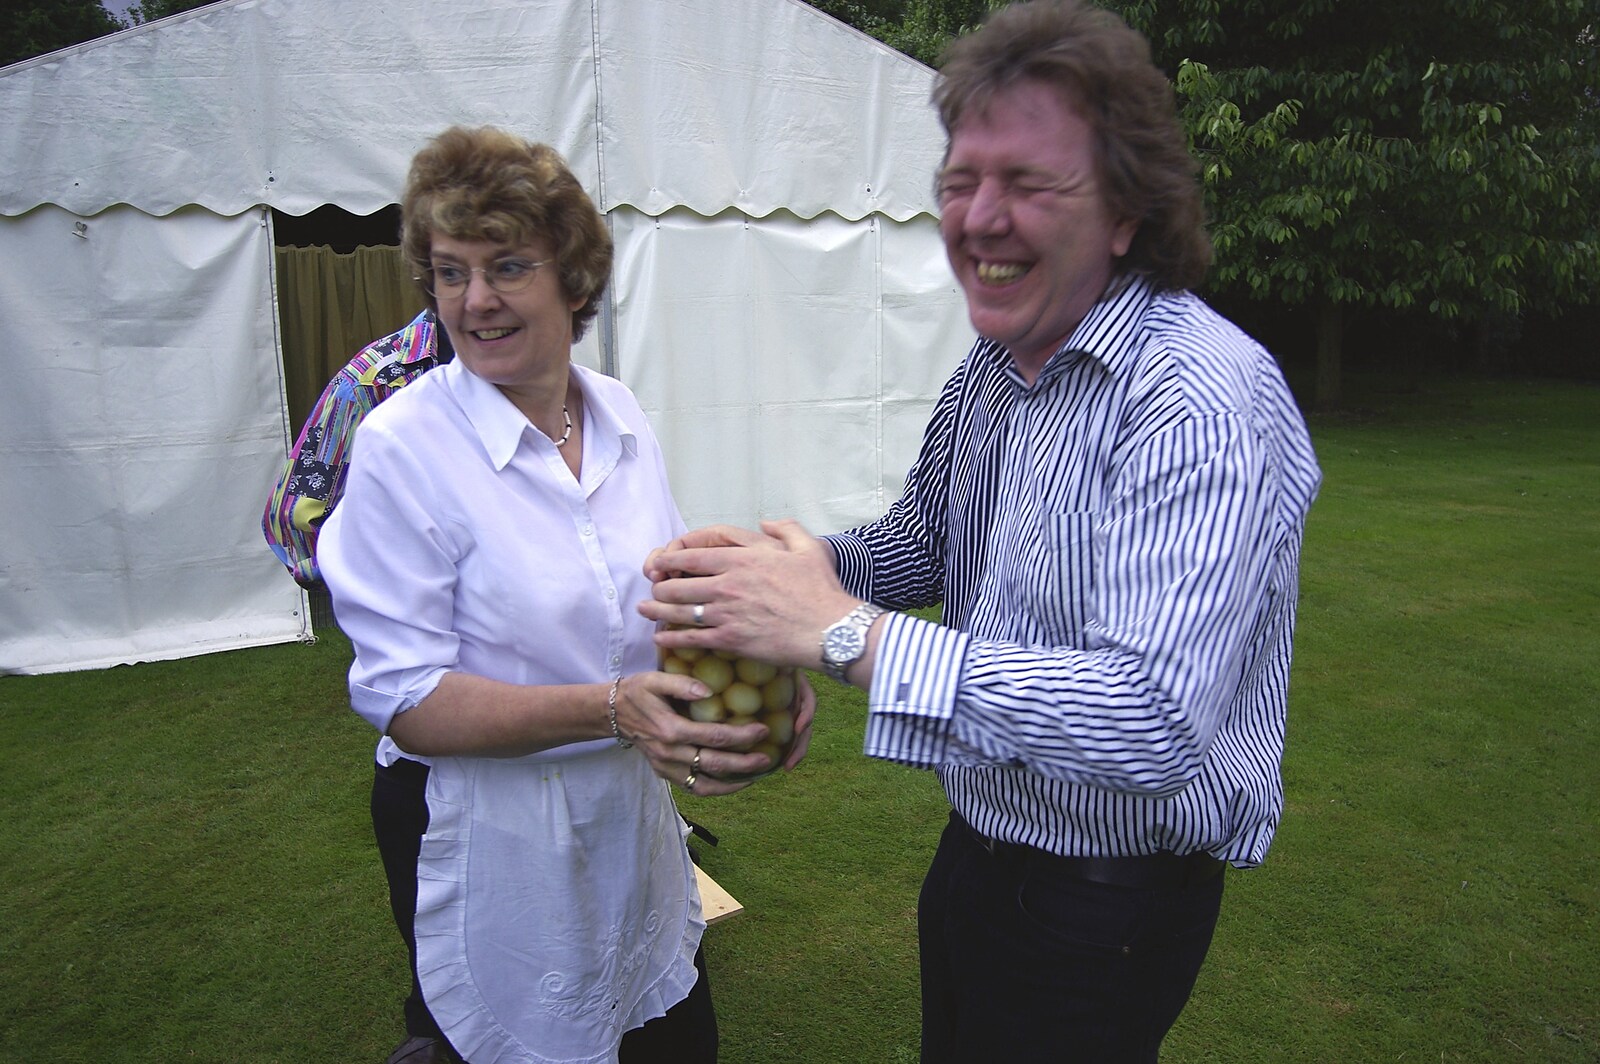 Max helps to open a jar of pickled onions from The BBs in a Garden, and a Qualcomm Safari, Woburn, Bedfordshire - 22nd July 2007